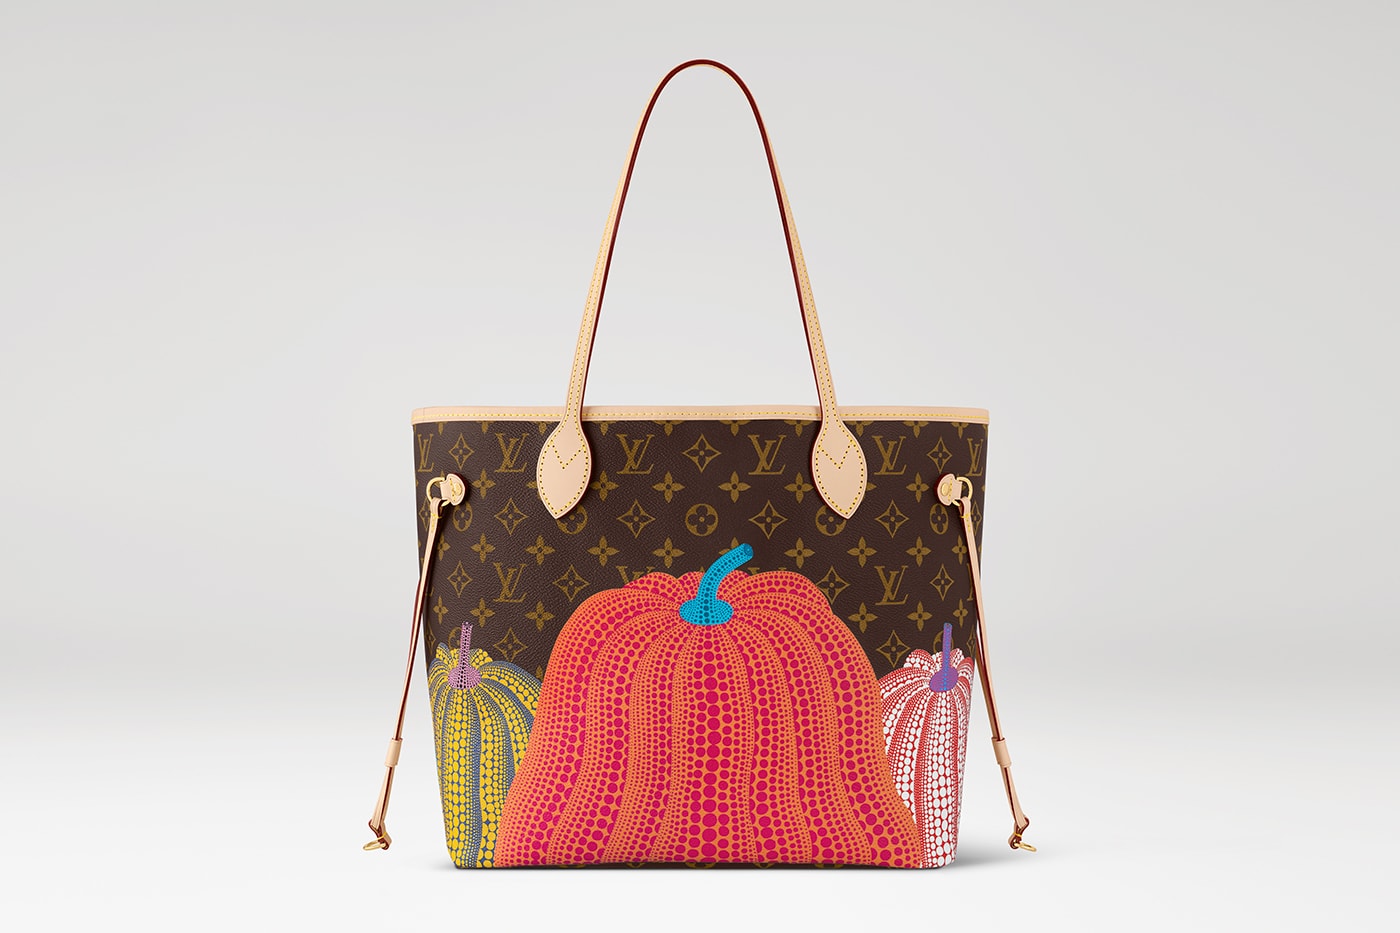 Louis Vuitton to Release Second Collaboration With Japanese Artist